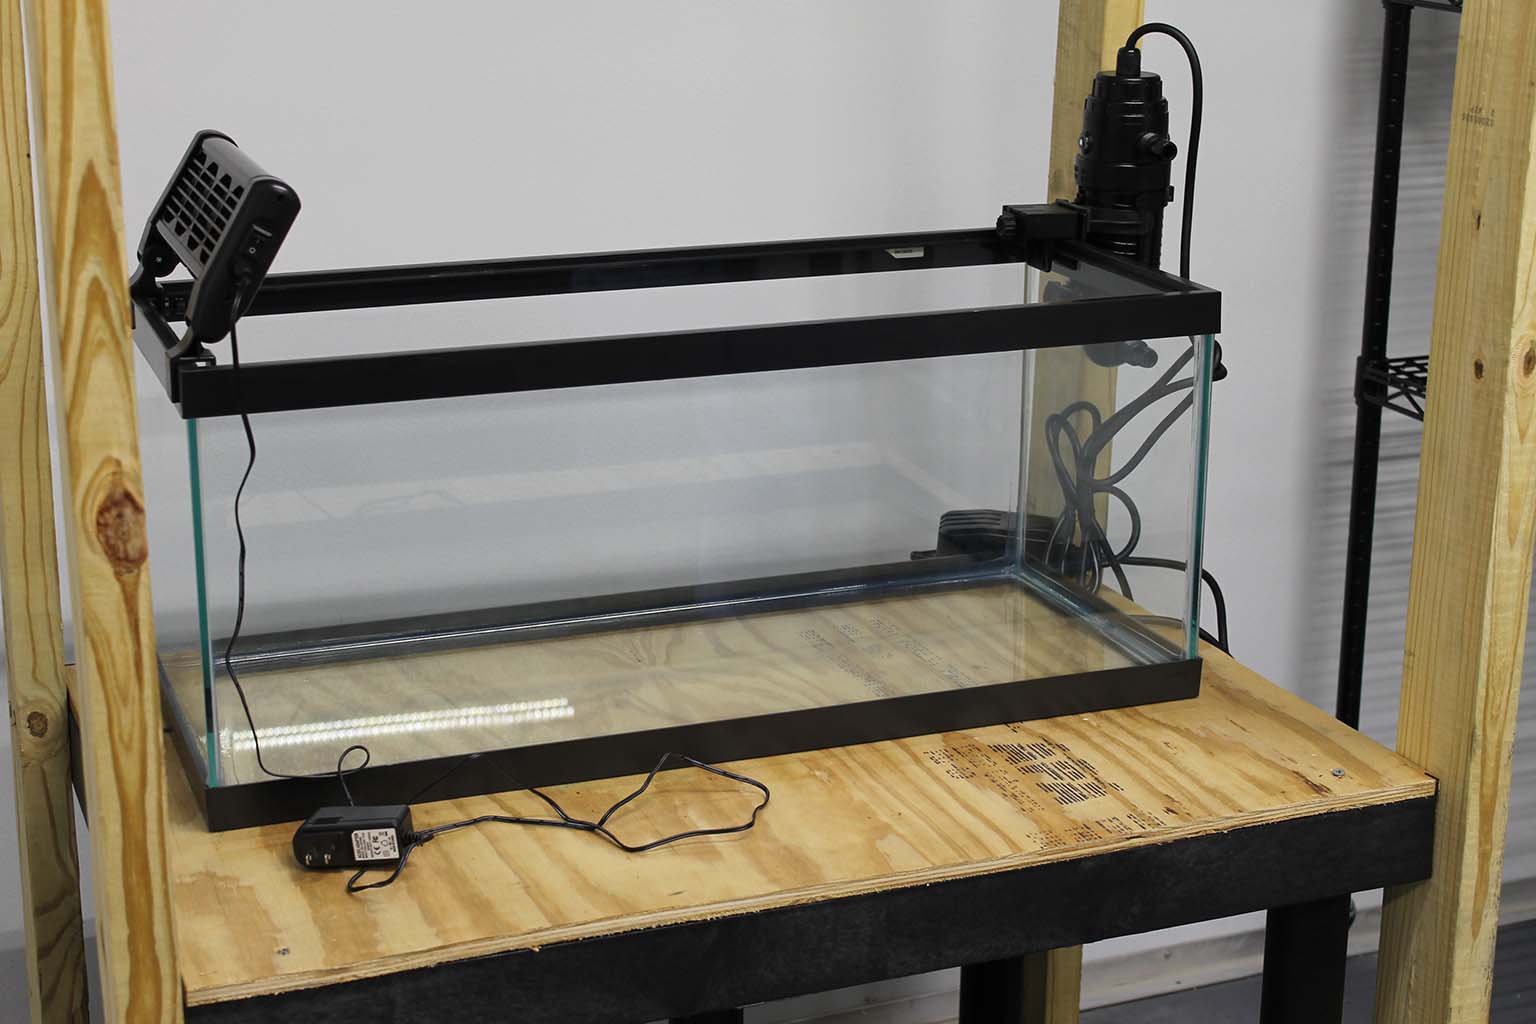 An approximately 30-gallon, empty, glass-sided aquarium tank sits on a plywood shelf.